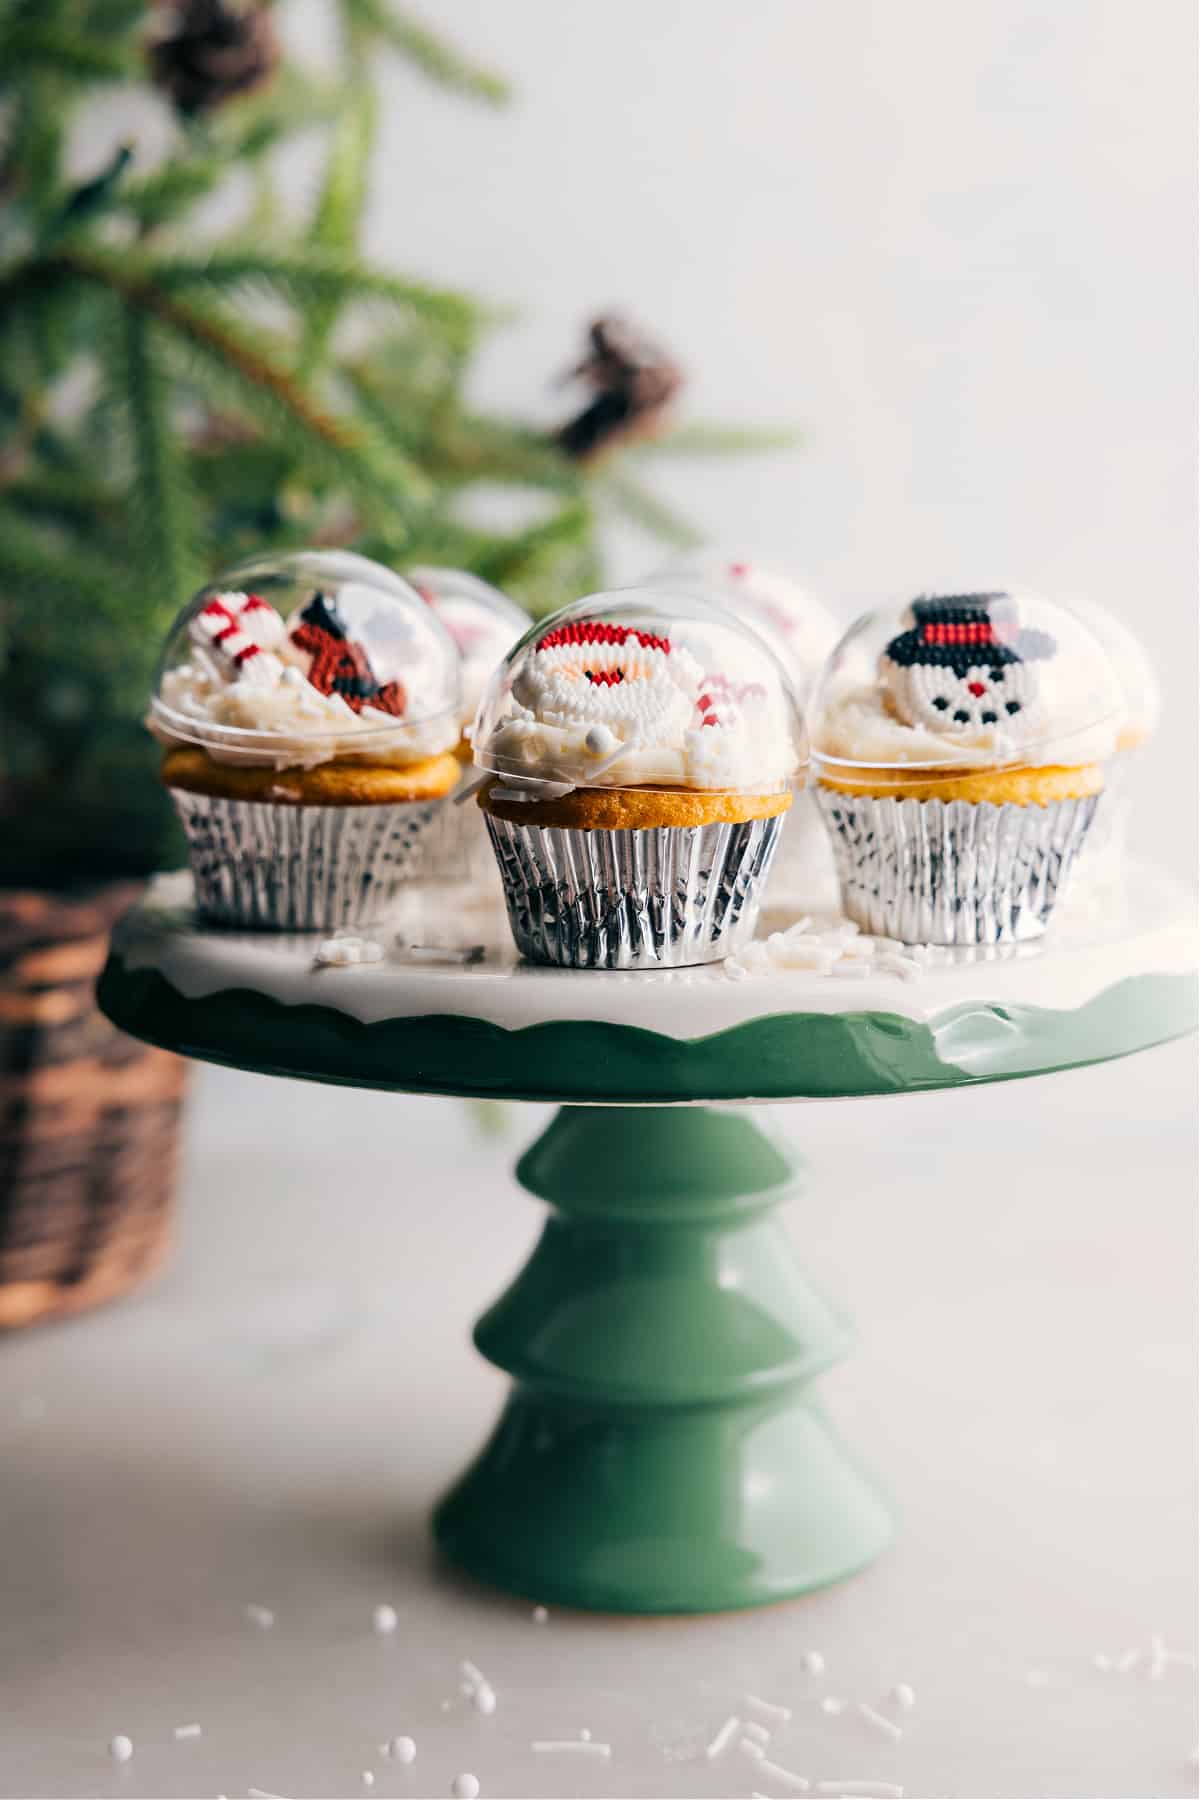 Several gorgeous Christmas cupcakes on a stand, decorated to resemble ornaments, creating a beautiful and festive dessert display.